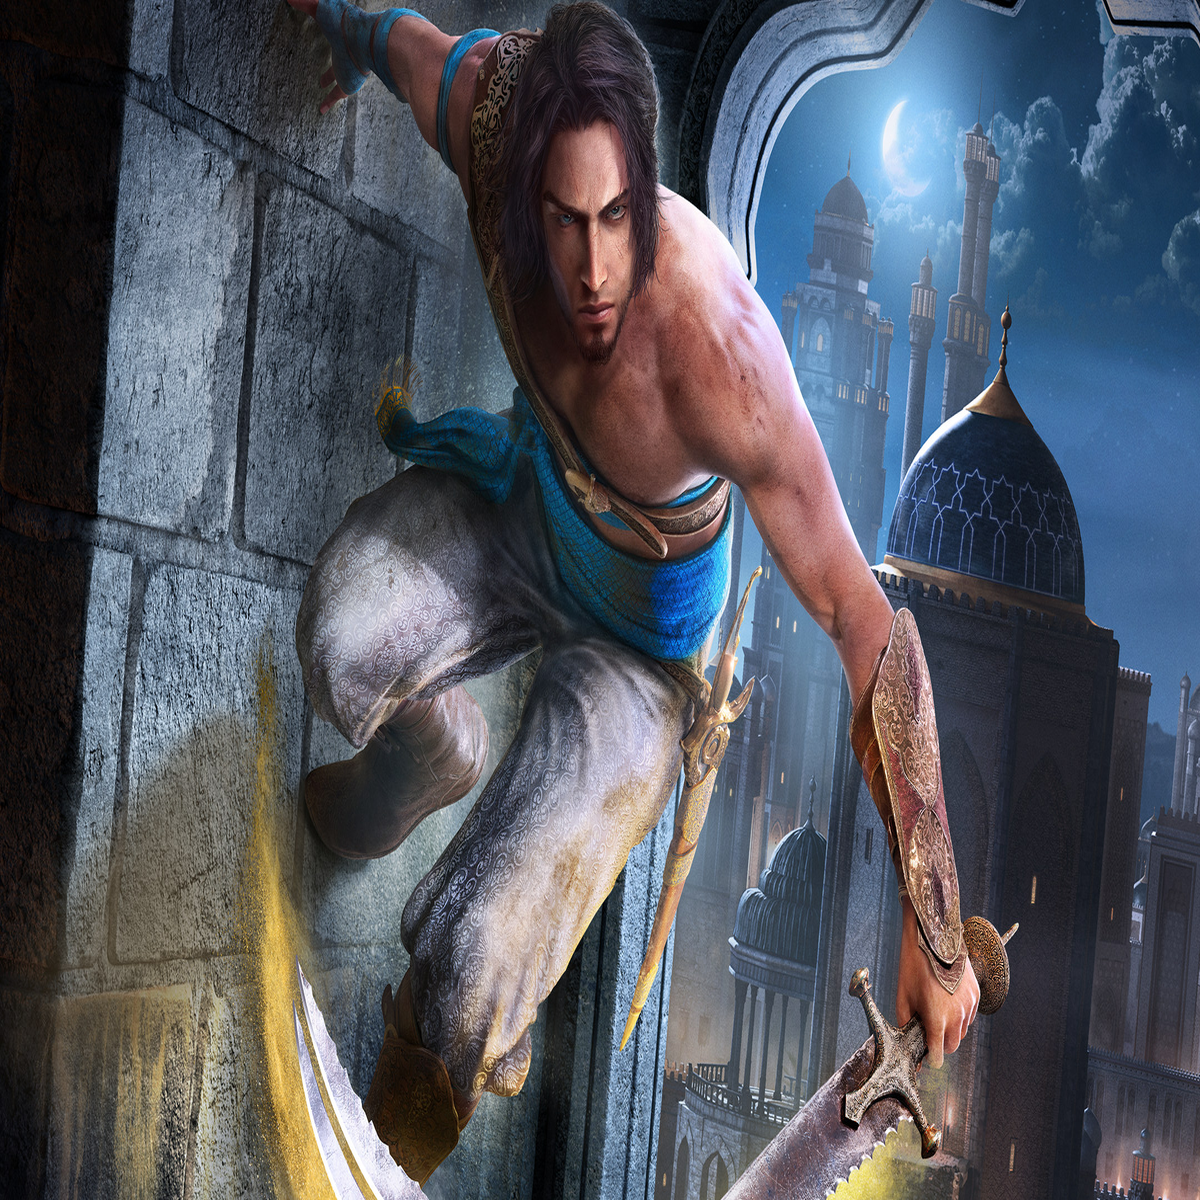 Prince of Persia: The Sands of Time Remake Is Real & Coming in January